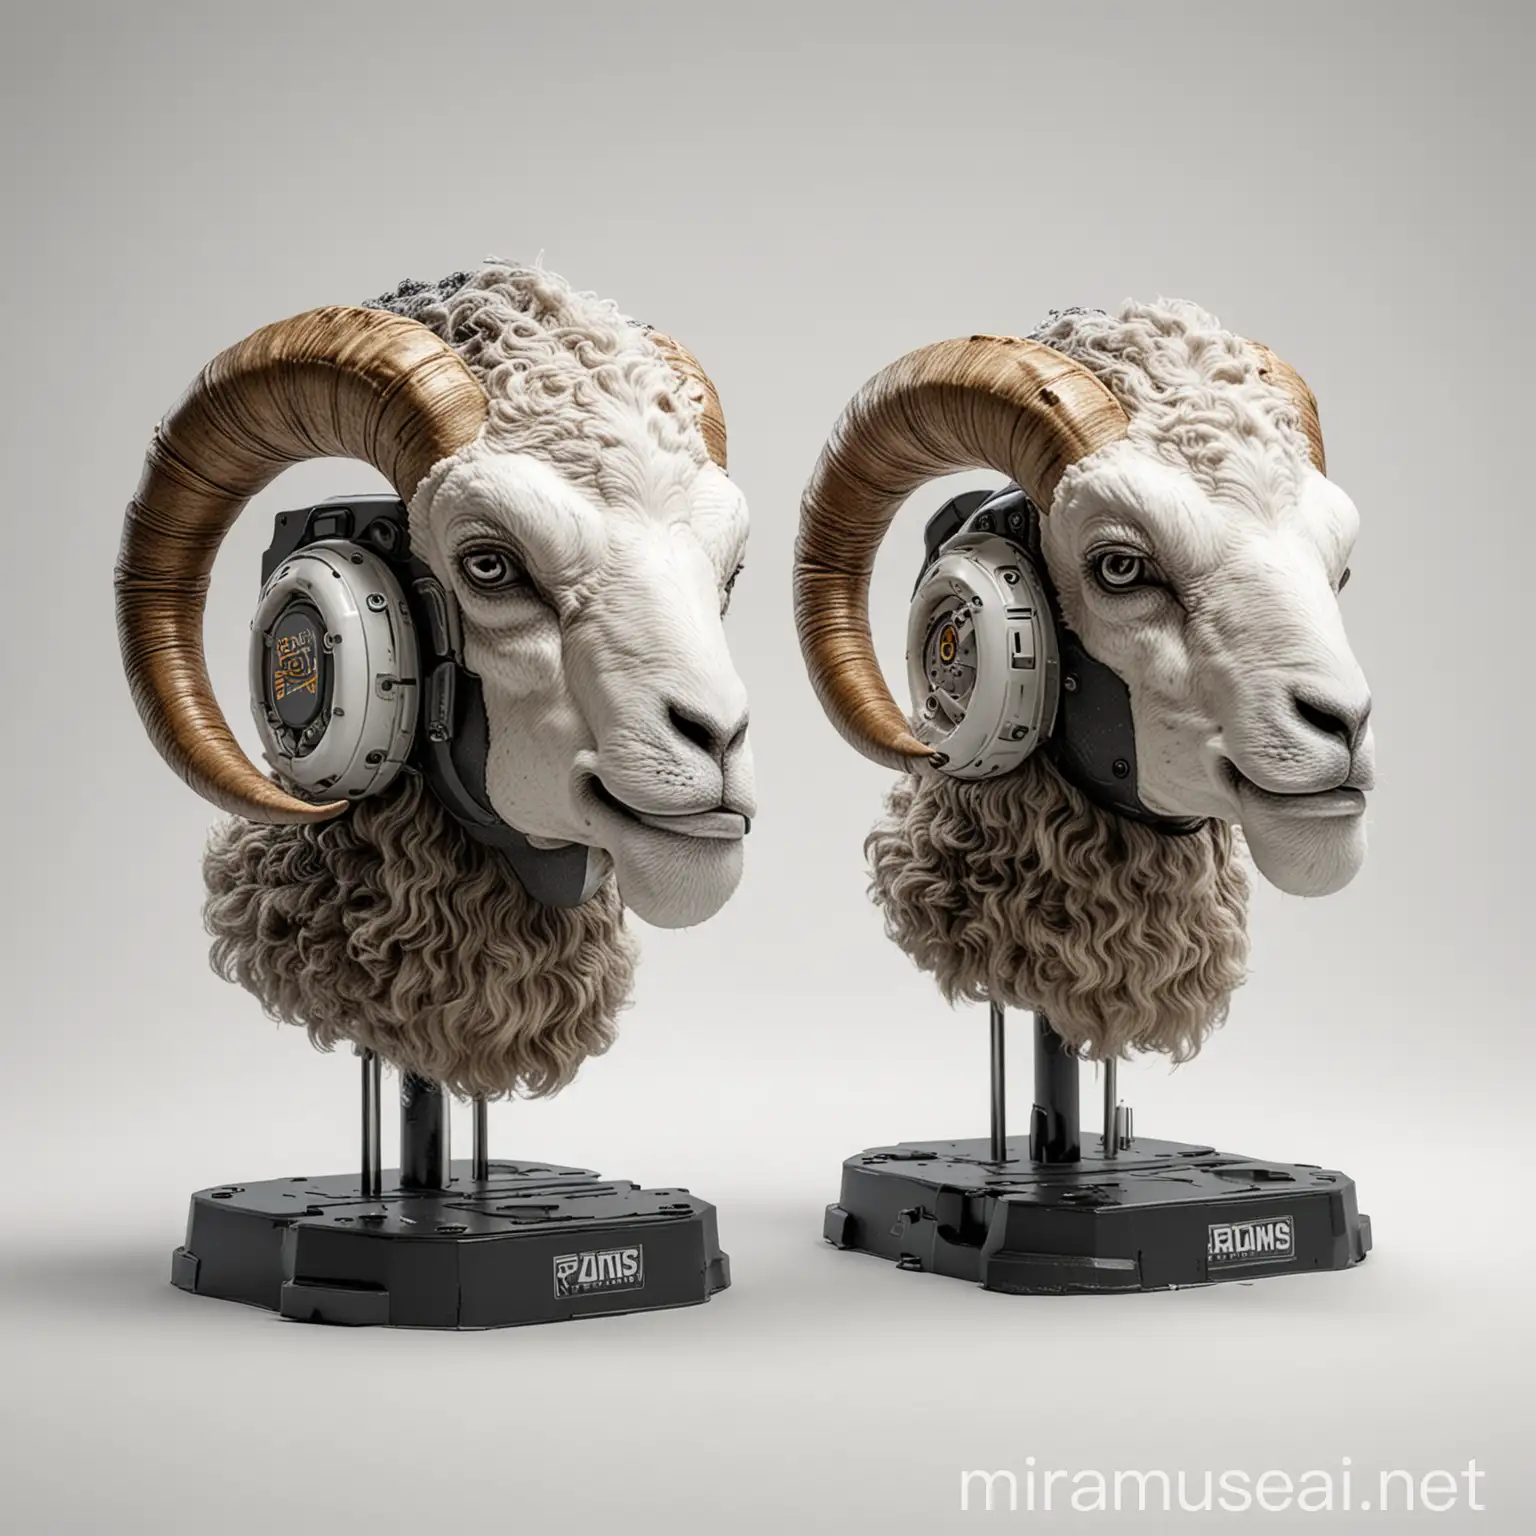 Three Rams Charging with Ram Helmets on White Background